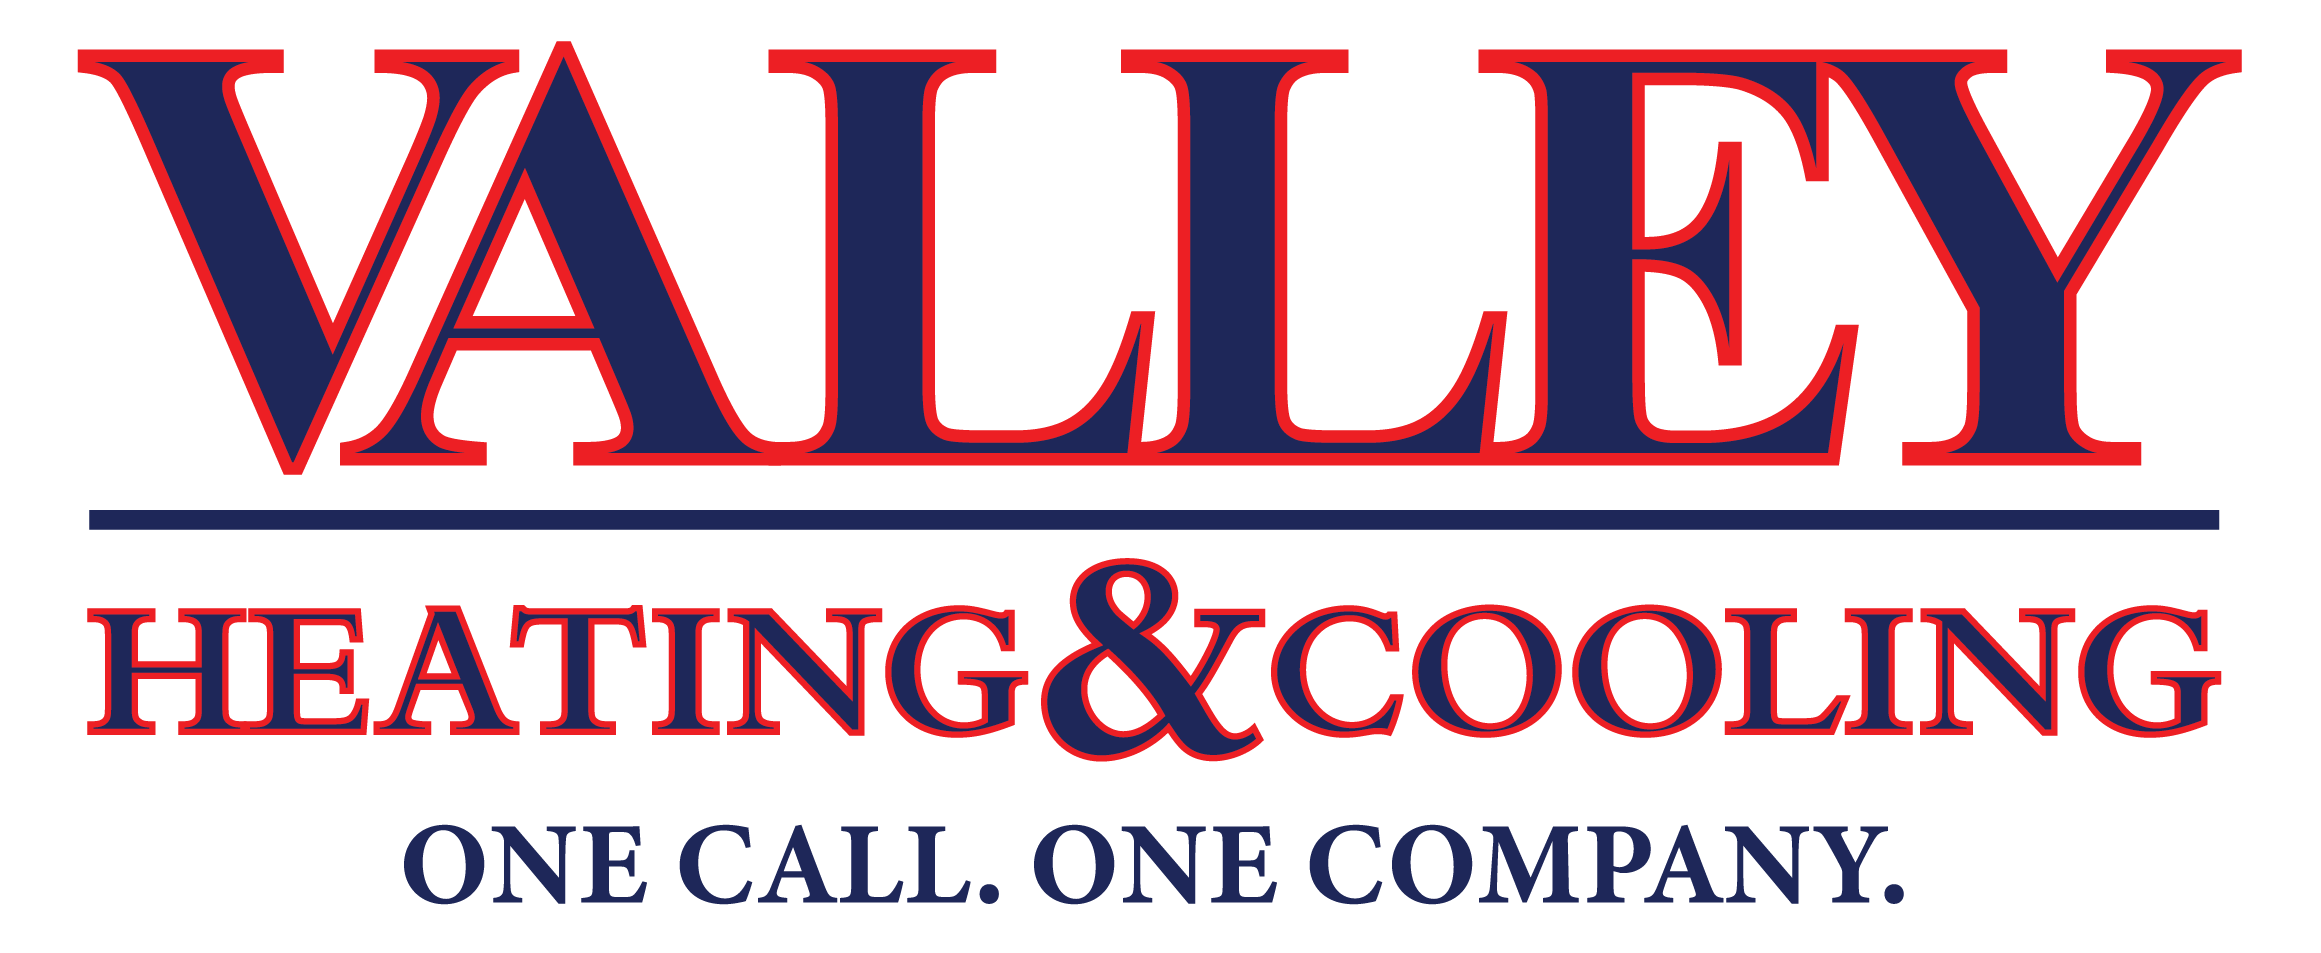 Valley Heating & Cooling Logo